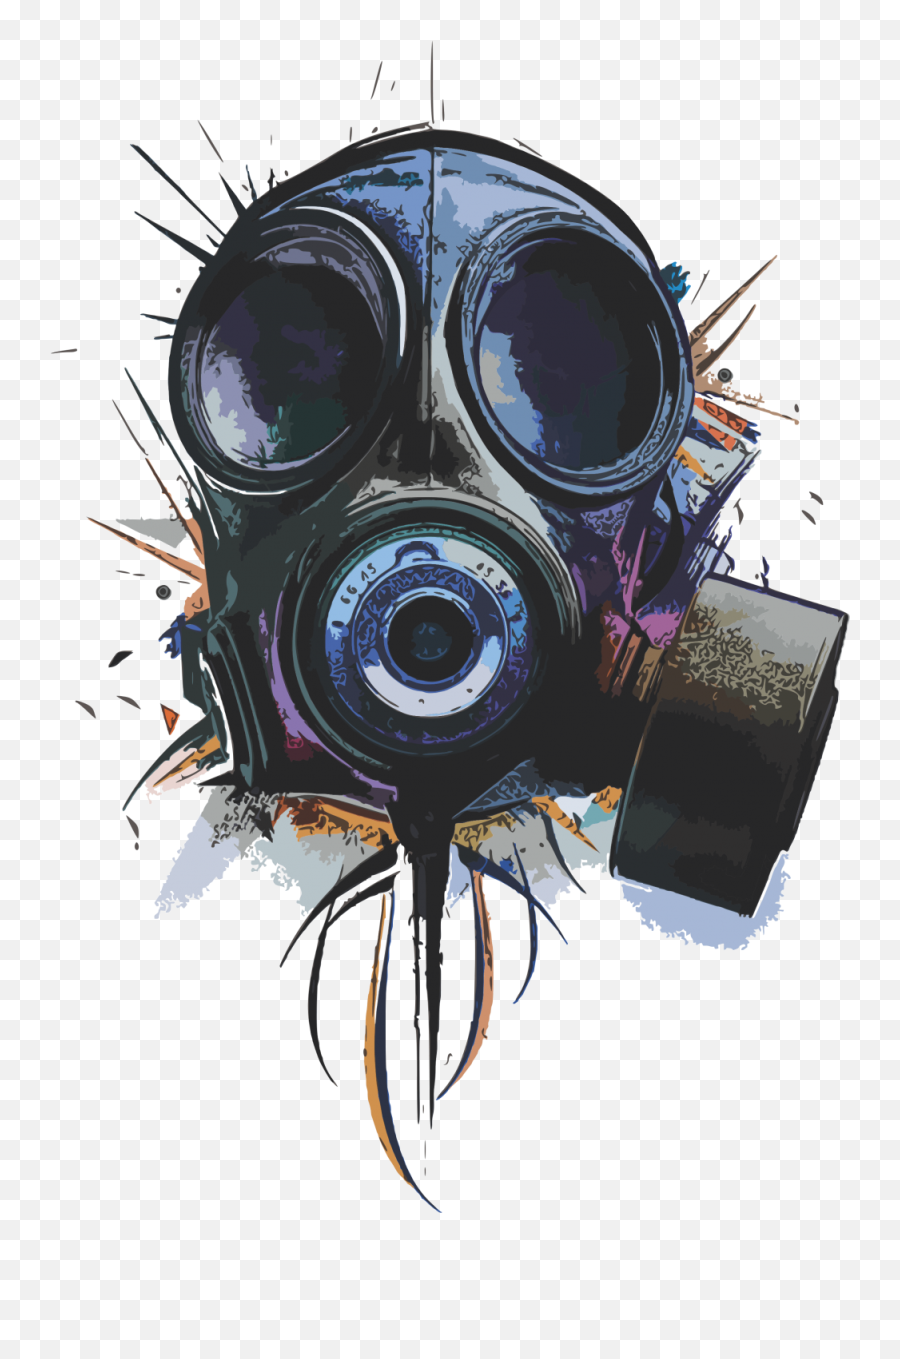 Skull Gas Mask Png - Scary Emoji,Gas Mask Png